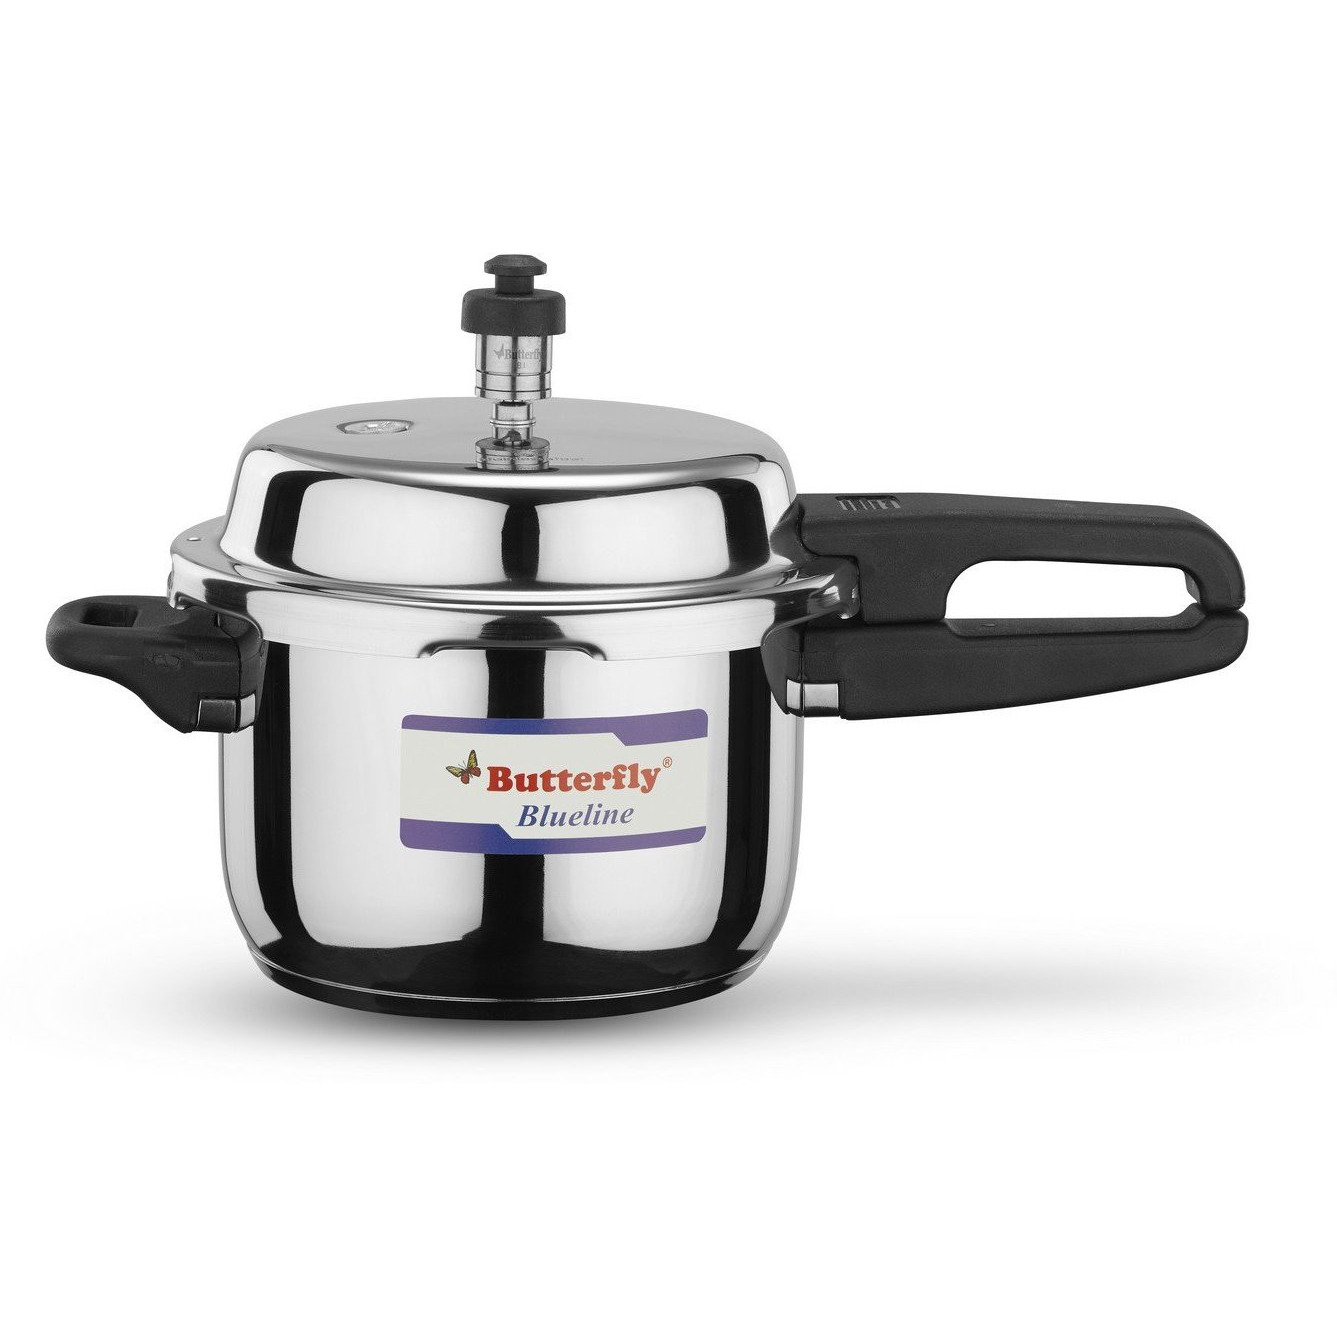 How To Use Butterfly Pressure Cooker | lupon.gov.ph